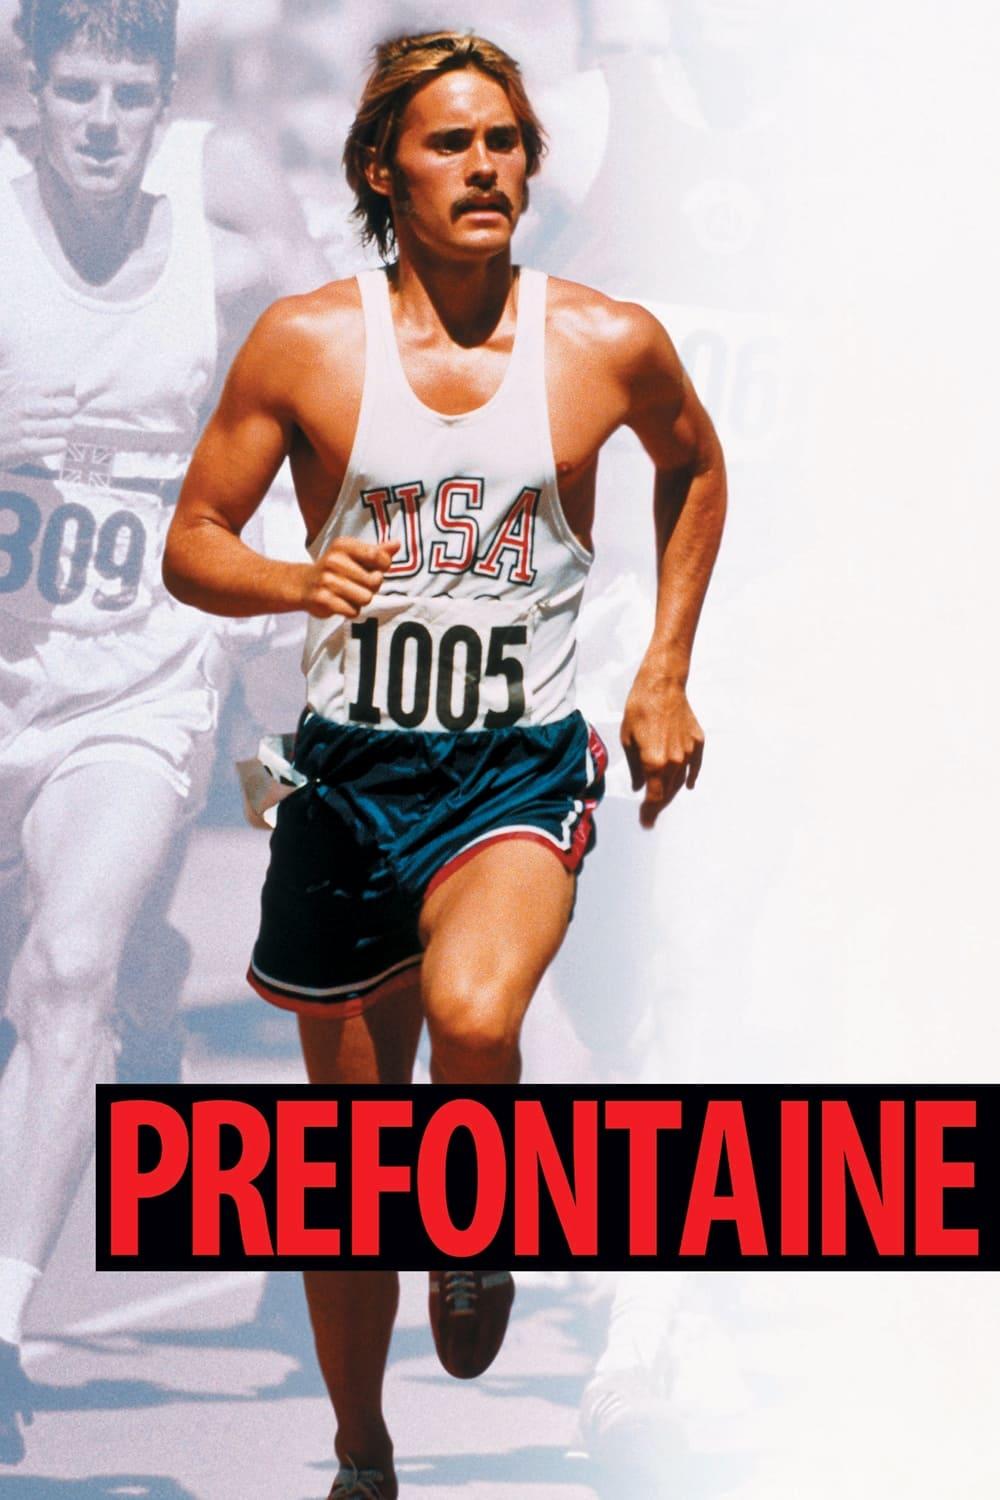 Prefontaine poster